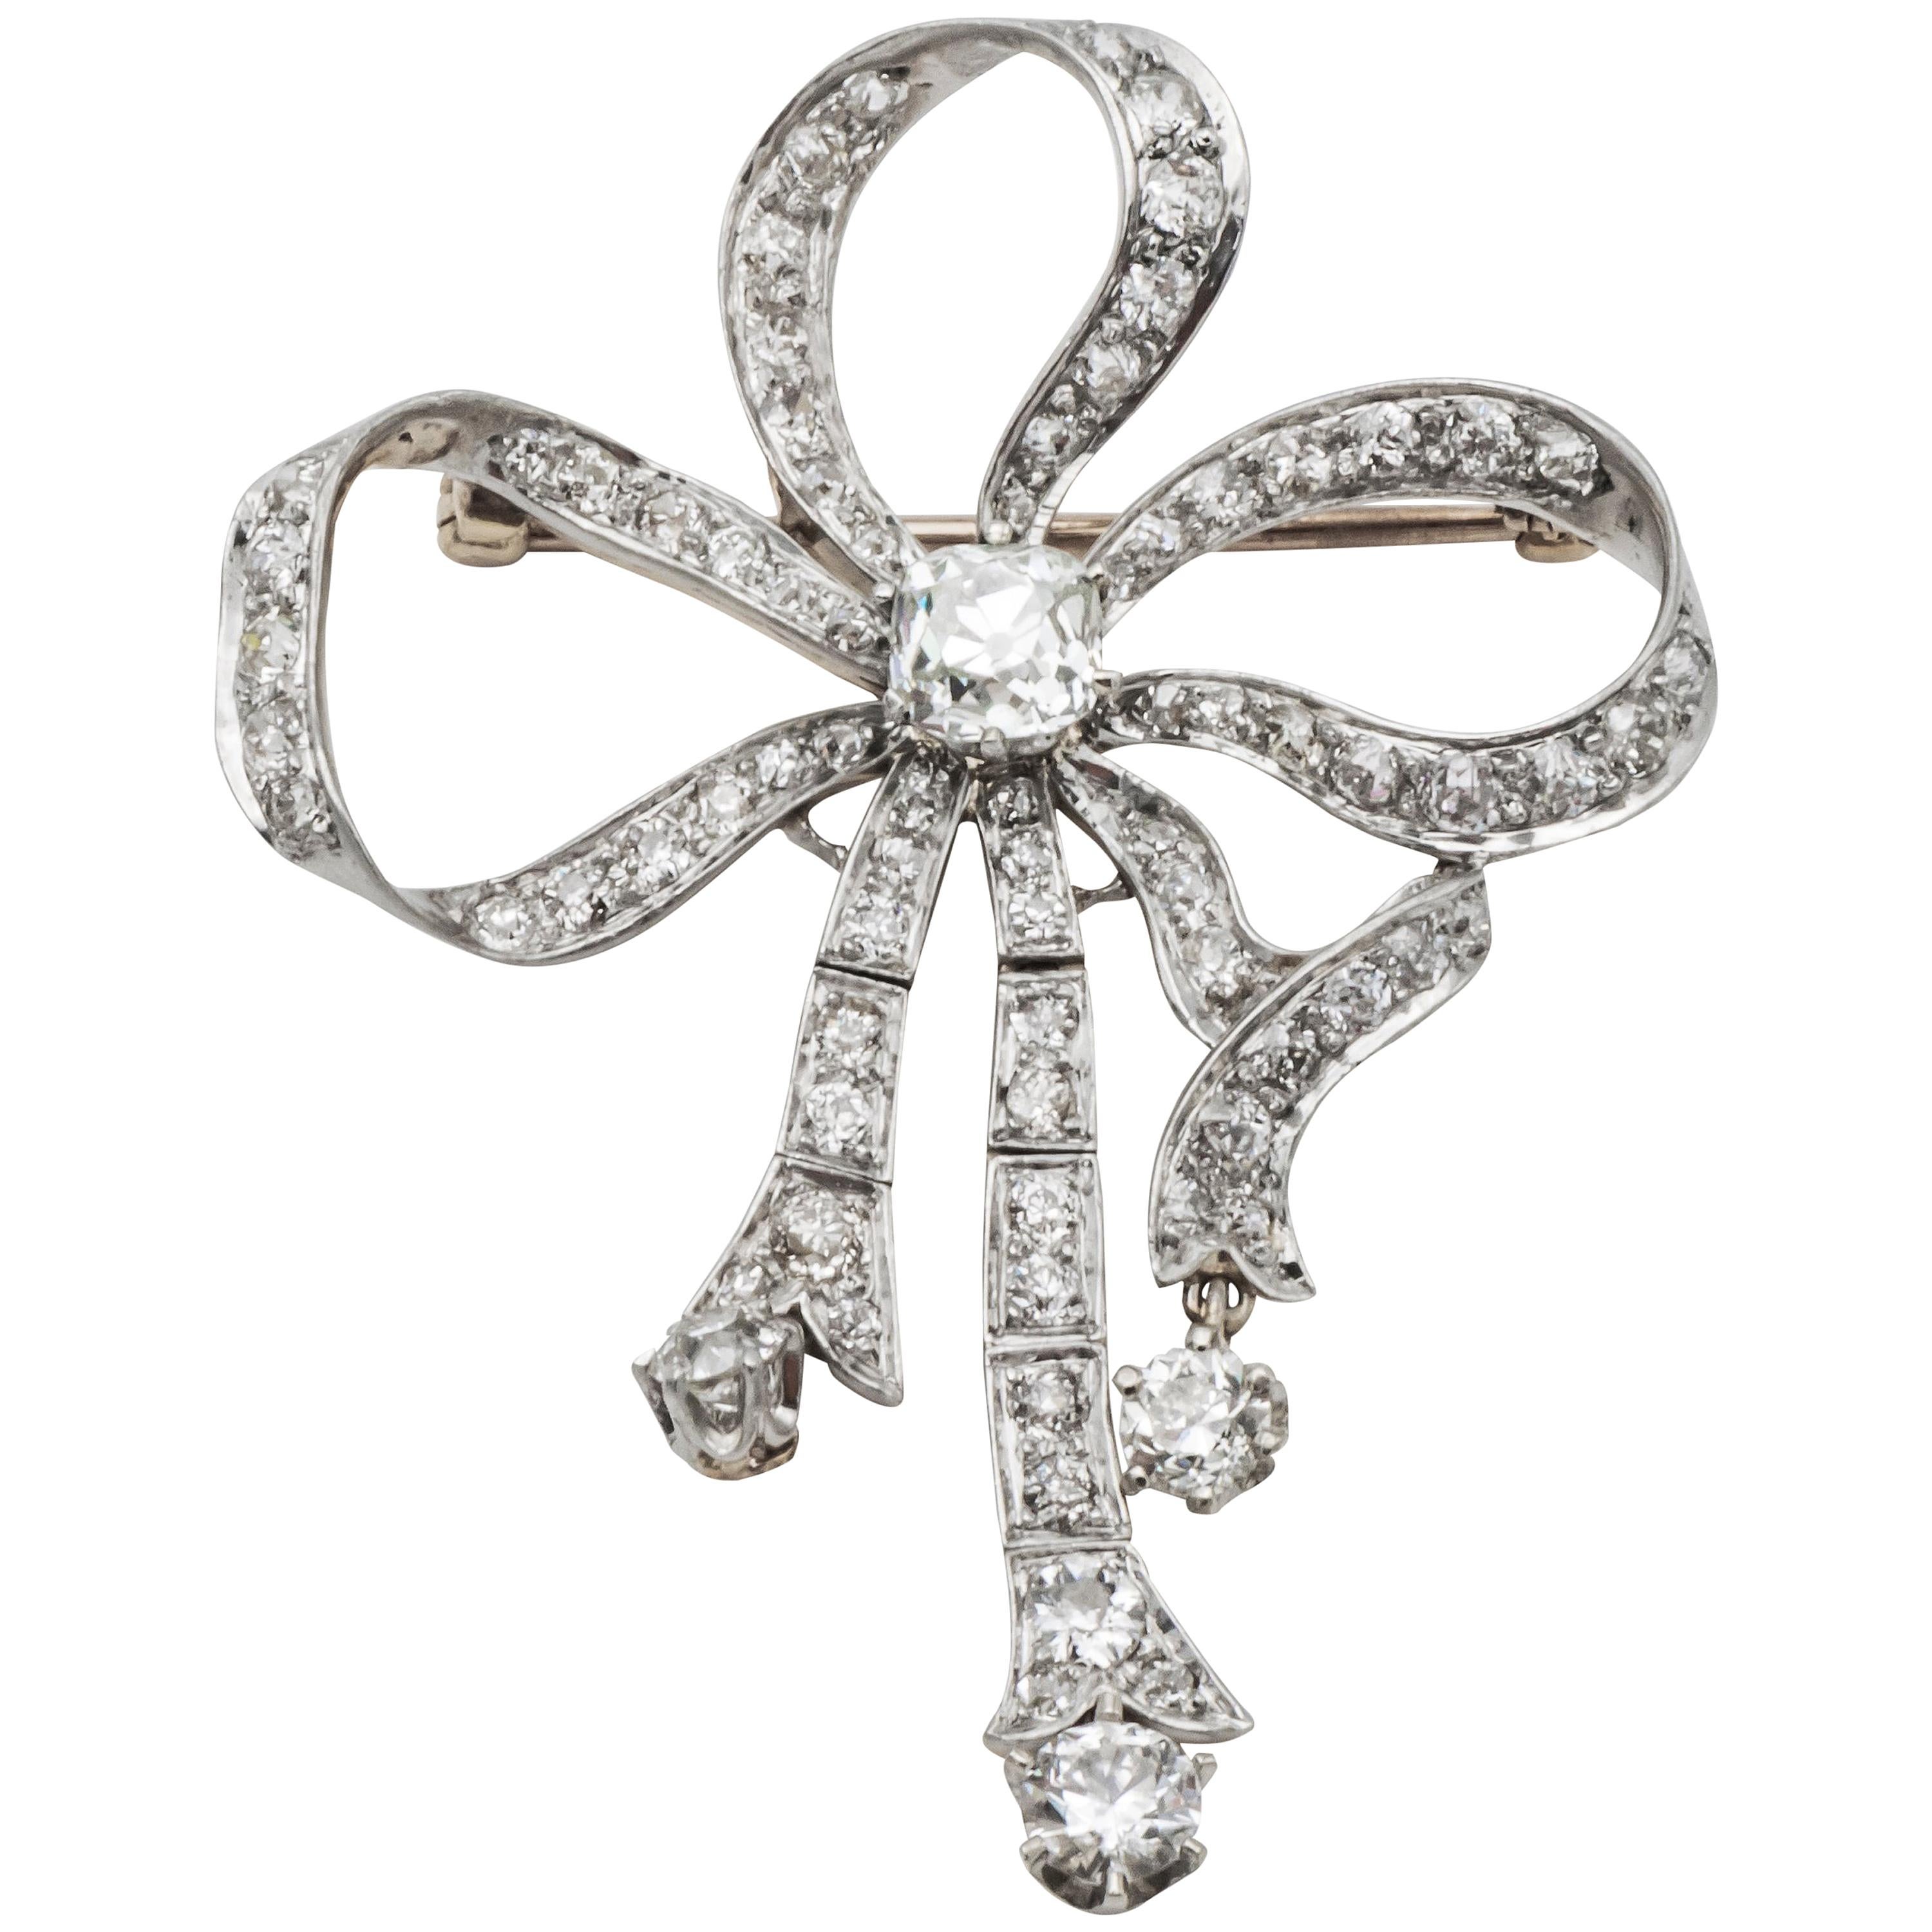 Antique Gold Platinum and Diamond Bow Brooch